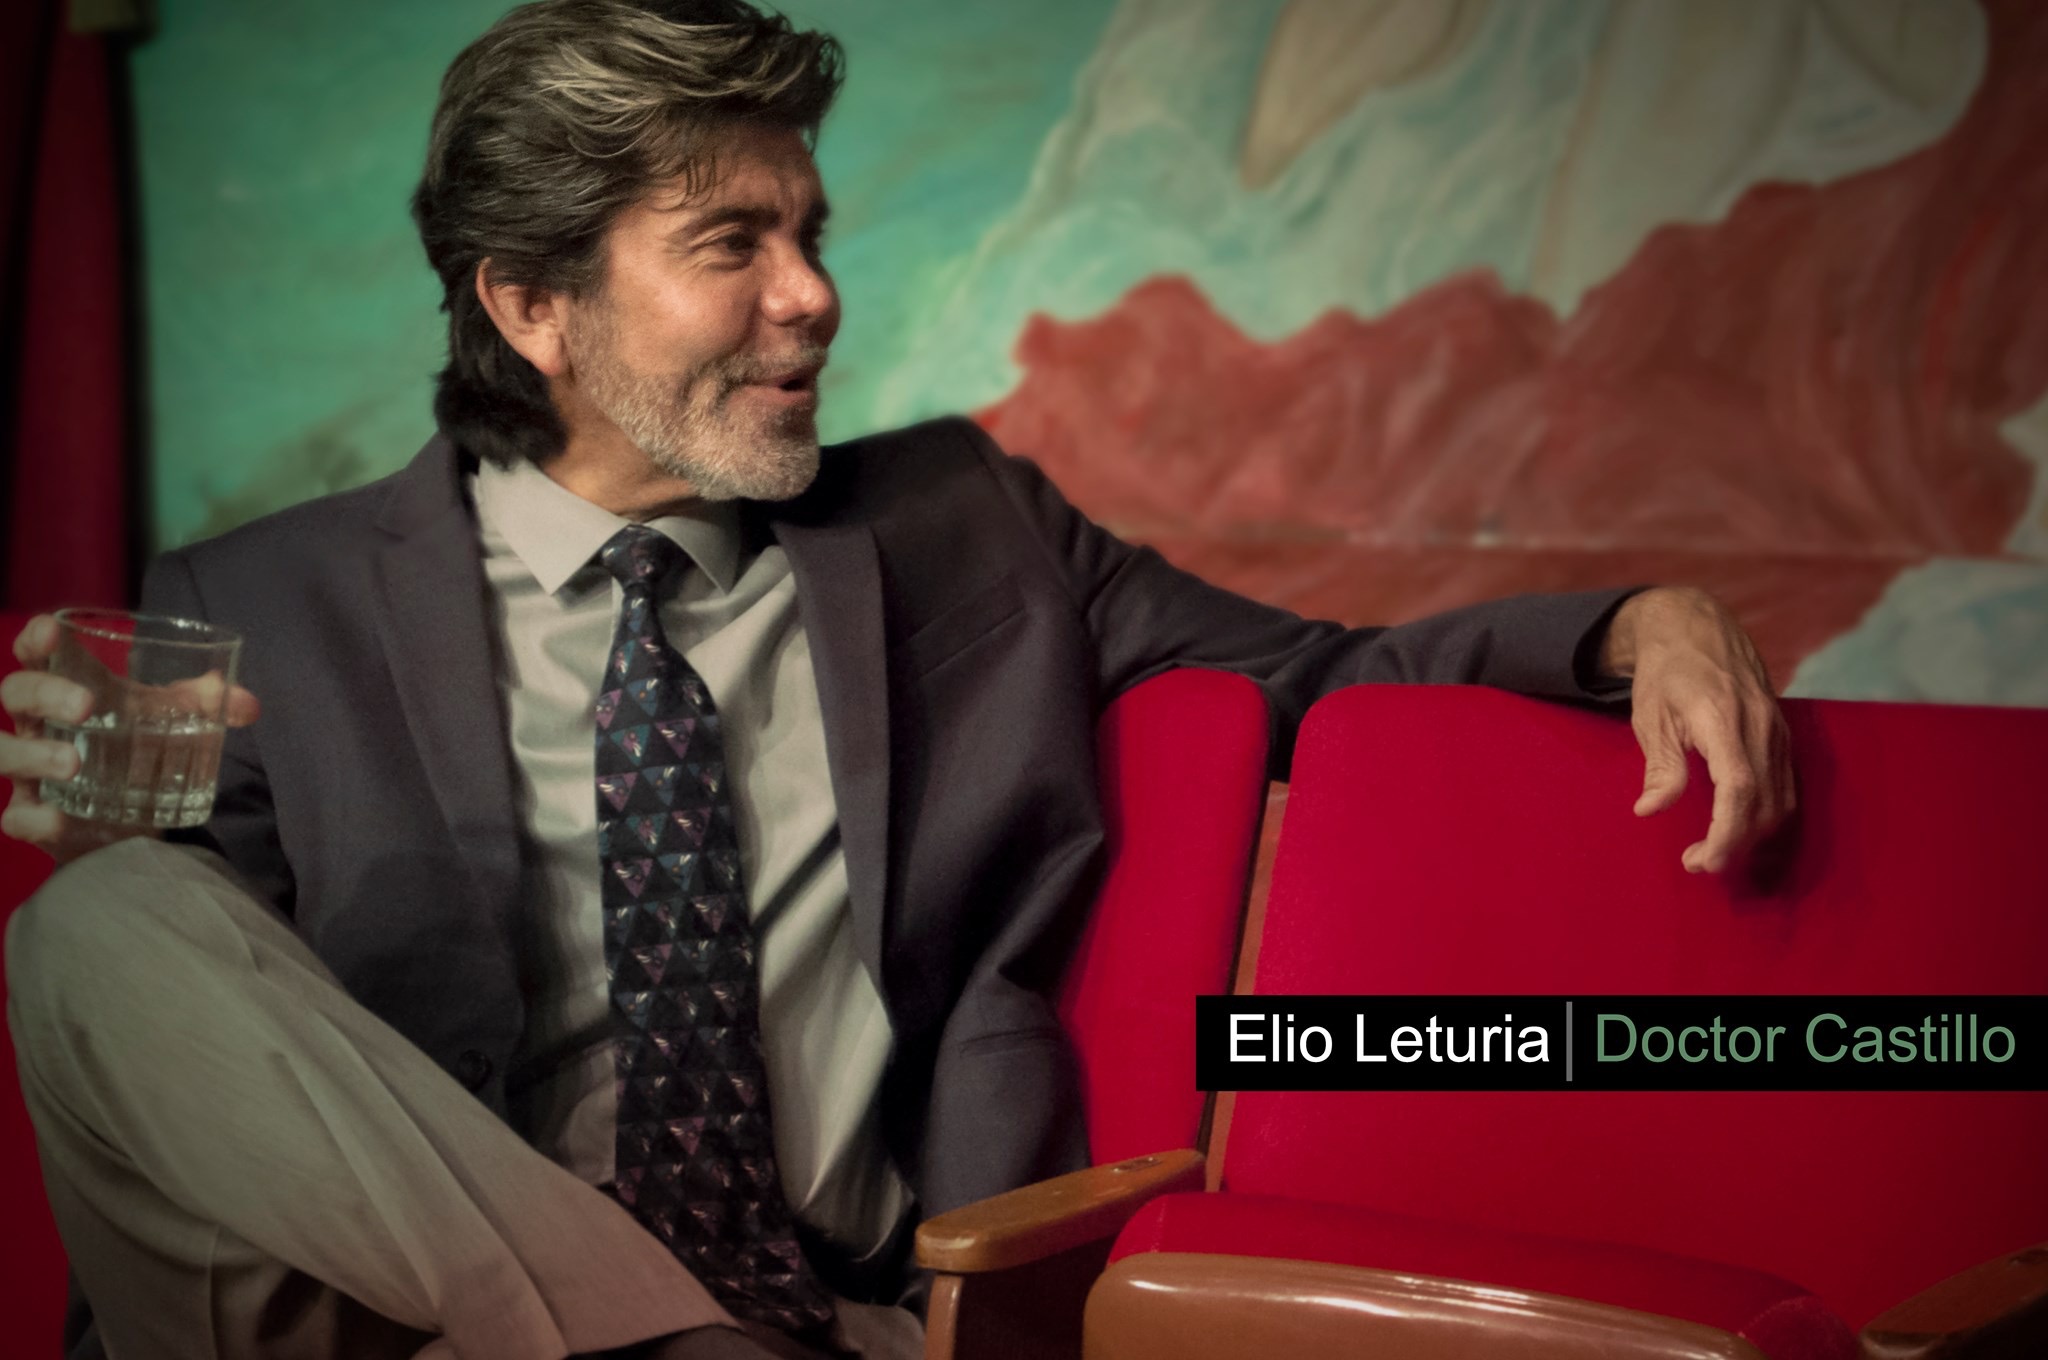 Elio Leturia sitting on a red sofa in the play Exquisita Agonía.